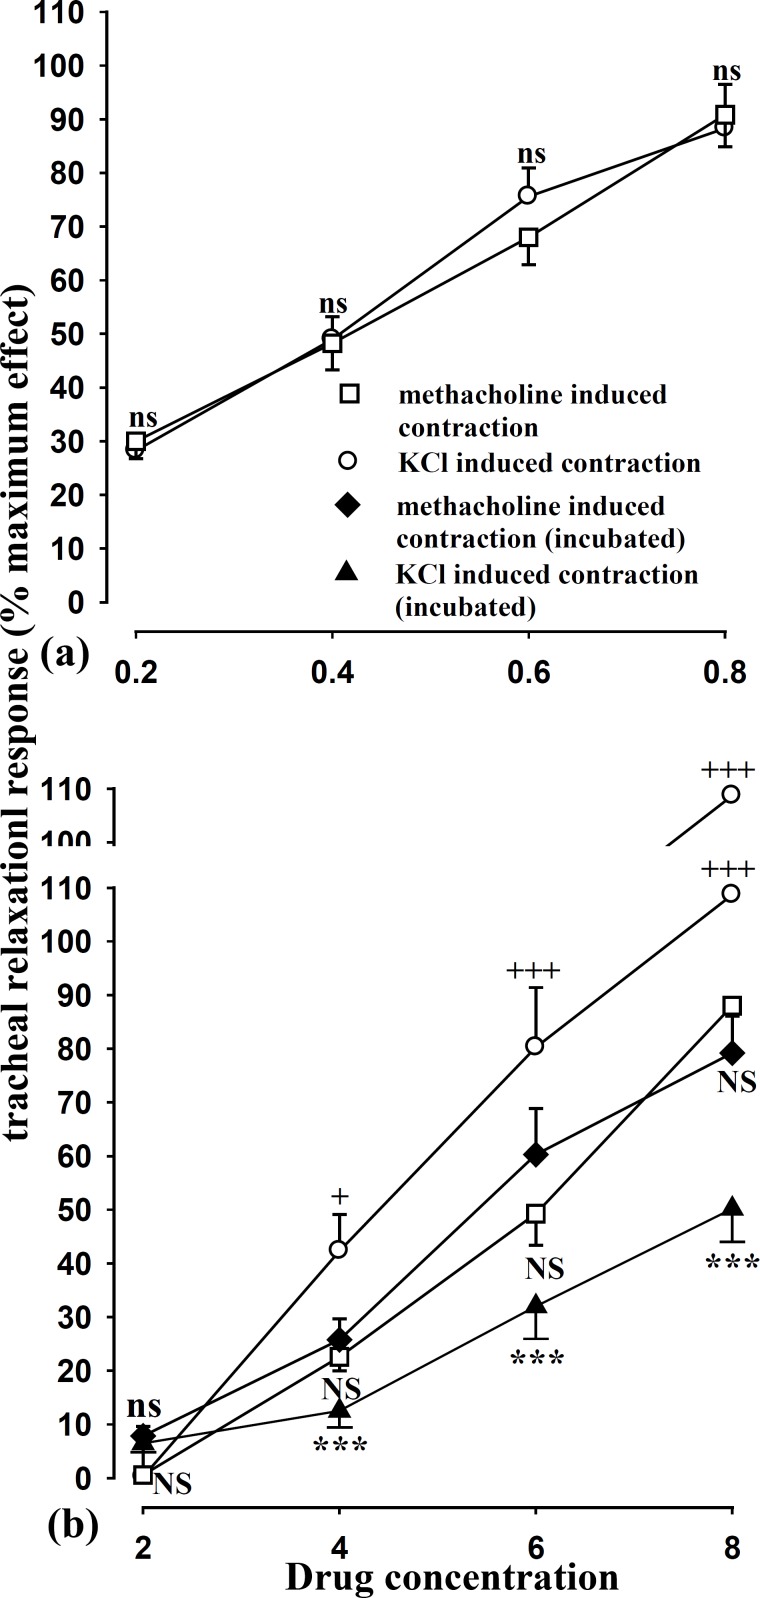 Concentration response curves of the relaxant effect of theophylline (a) and the extract of Achillea millefollium (b) in four groups of experiments. group 1; KCl induced contraction of tracheal chains (ο, n = 7), group 2; methacholine induced contraction of tracheal chains (■, n = 9), group 3; KCl induced contraction of incubated tracheal chains with atropine, propranolol and chlorpheniramine (▲, n = 7) and group 4; methacholine induced contraction of incubated tracheal chains with propranolol and chlorpheniramine (♦, n = 8). Statistical differences in the relaxant effect of different concentrations of each solution between group 1 and 2; ns: non-significant difference, +; p < 0.05, +++; p<0.001. Statistical differences in the relaxant effect of different concentrations of the extract between group 1 and 3; ns, non significant difference, ***; p < 0.001. Statistical differences in the relaxant effect of different concentrations of the extract between group 2 with those of group 4; NS, non significant difference. The concentration unit for the extract was mg/mL and for theophylline, mM.